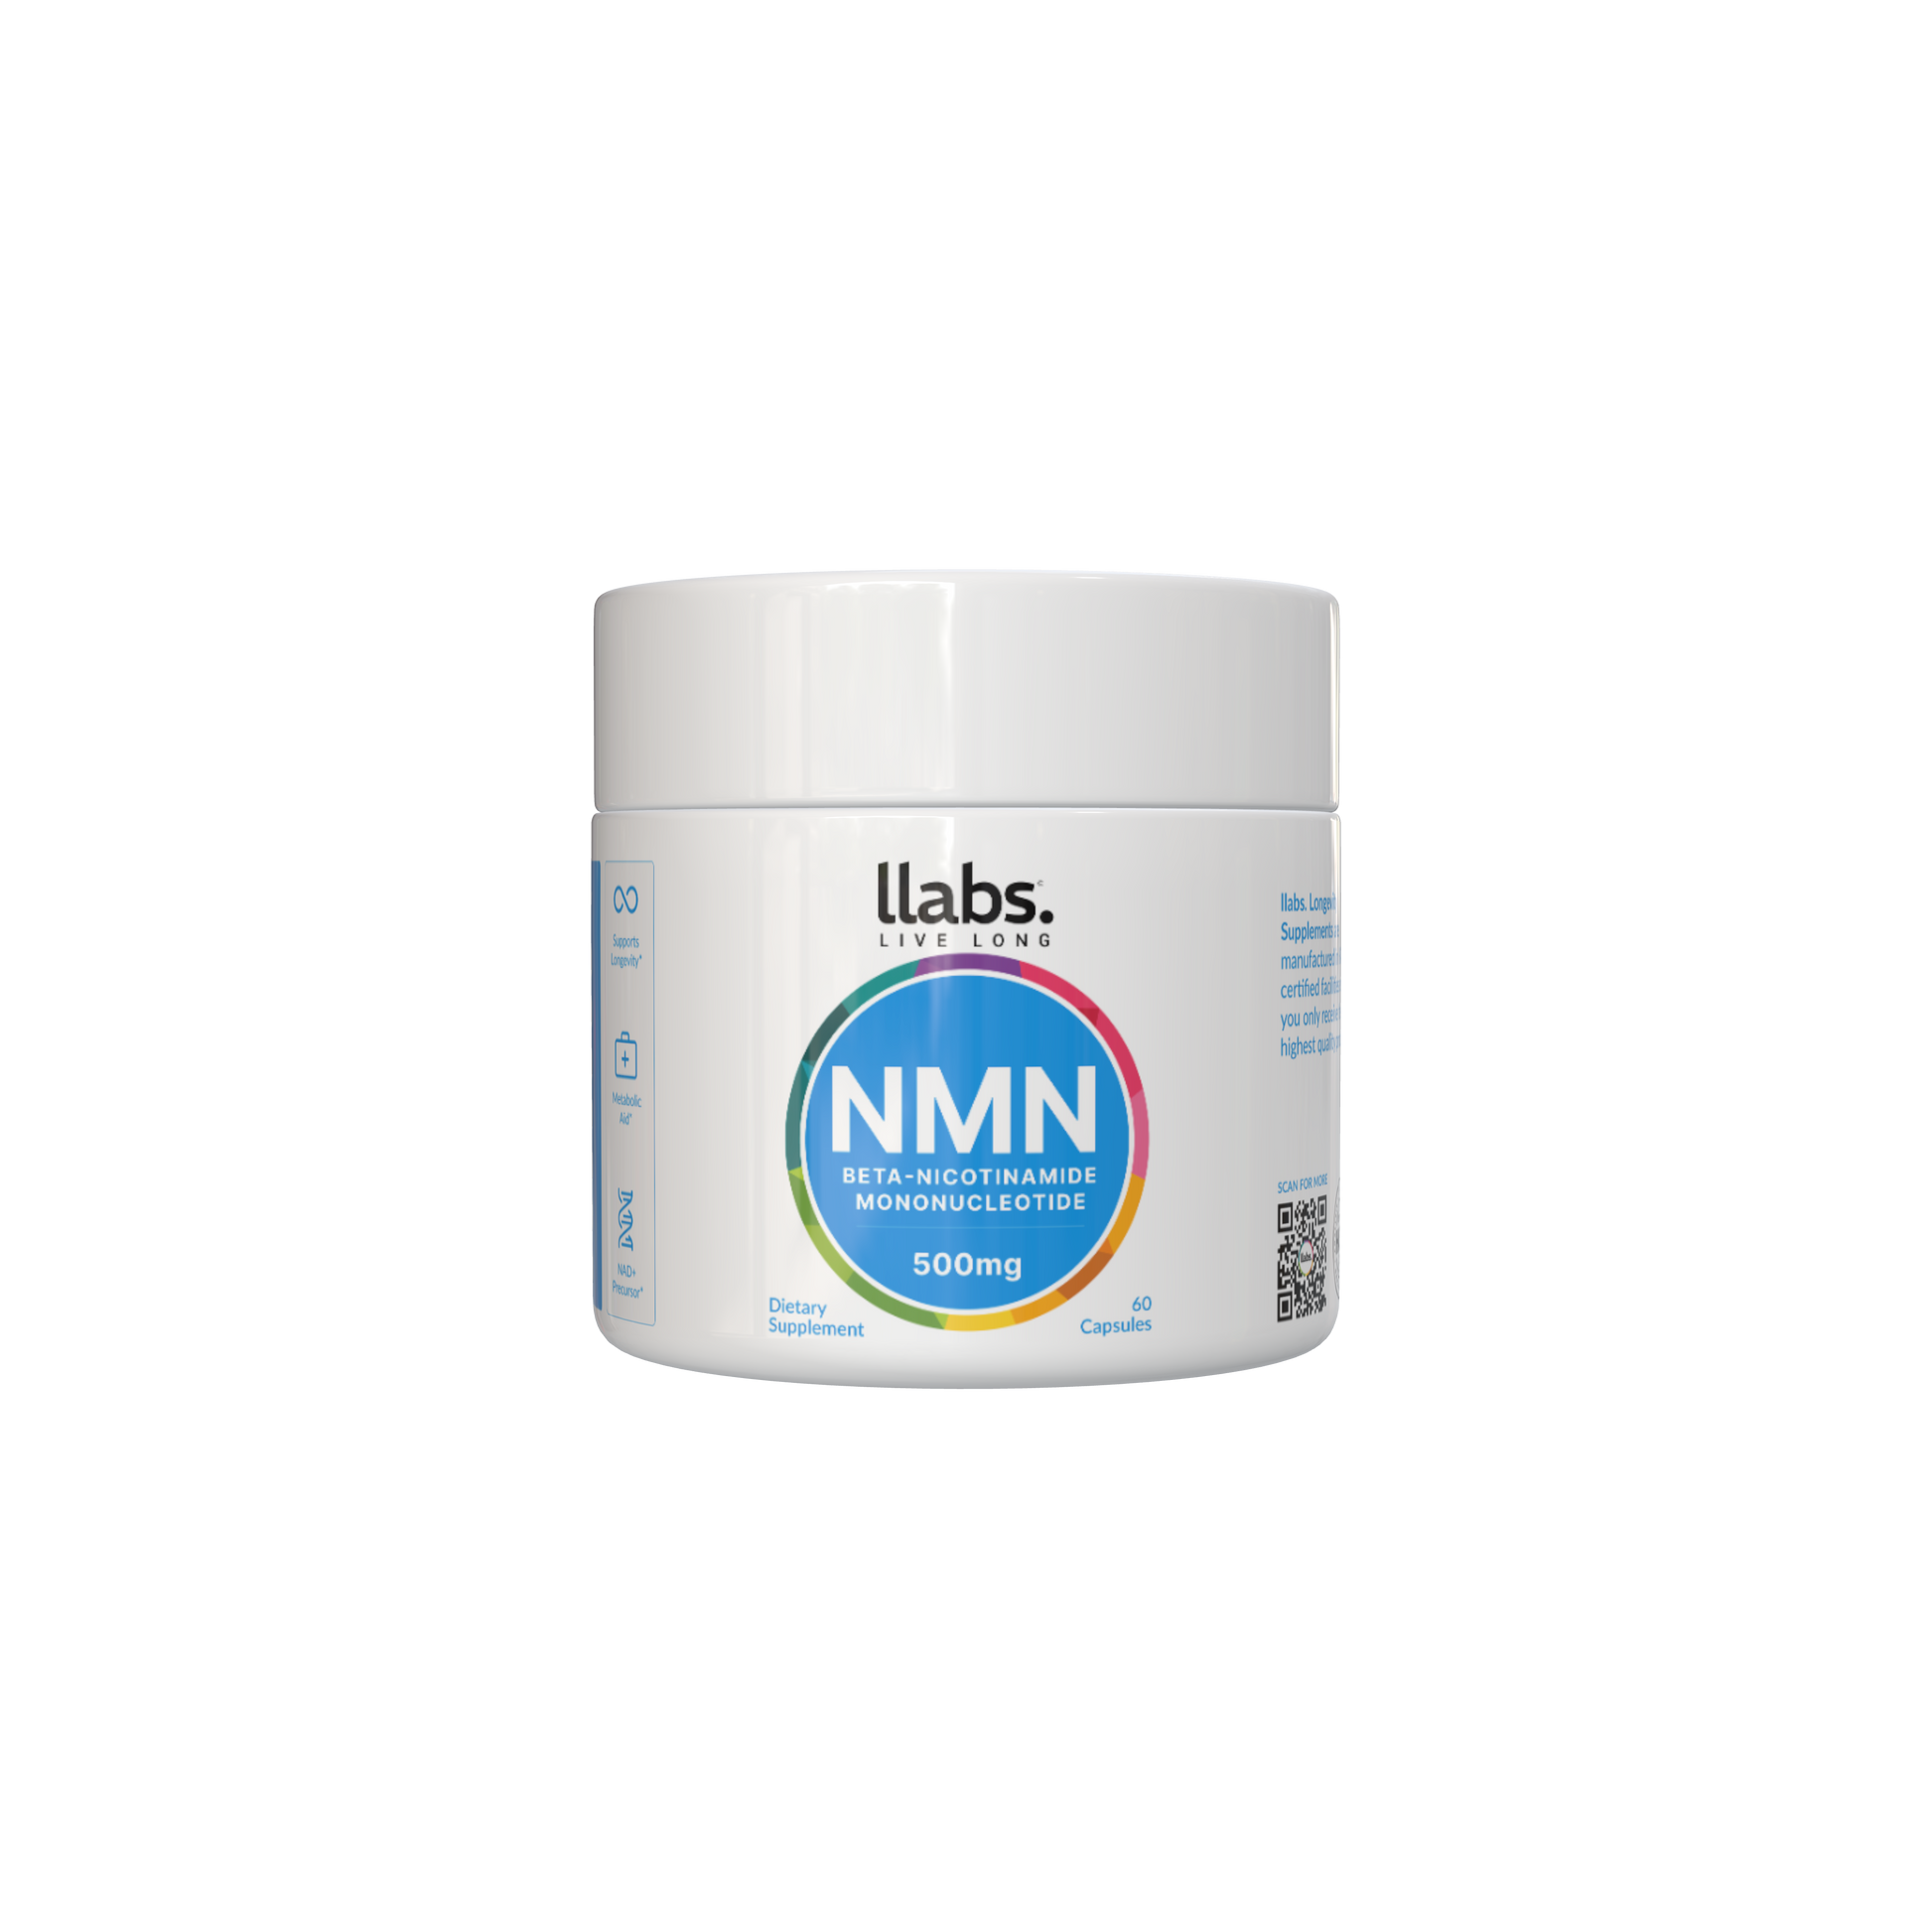 Sentence with replacements: A jar of llabs. NMN Capsules (nicotinamide mononucleotide) dietary supplement by llabs. with 500mg per capsule.